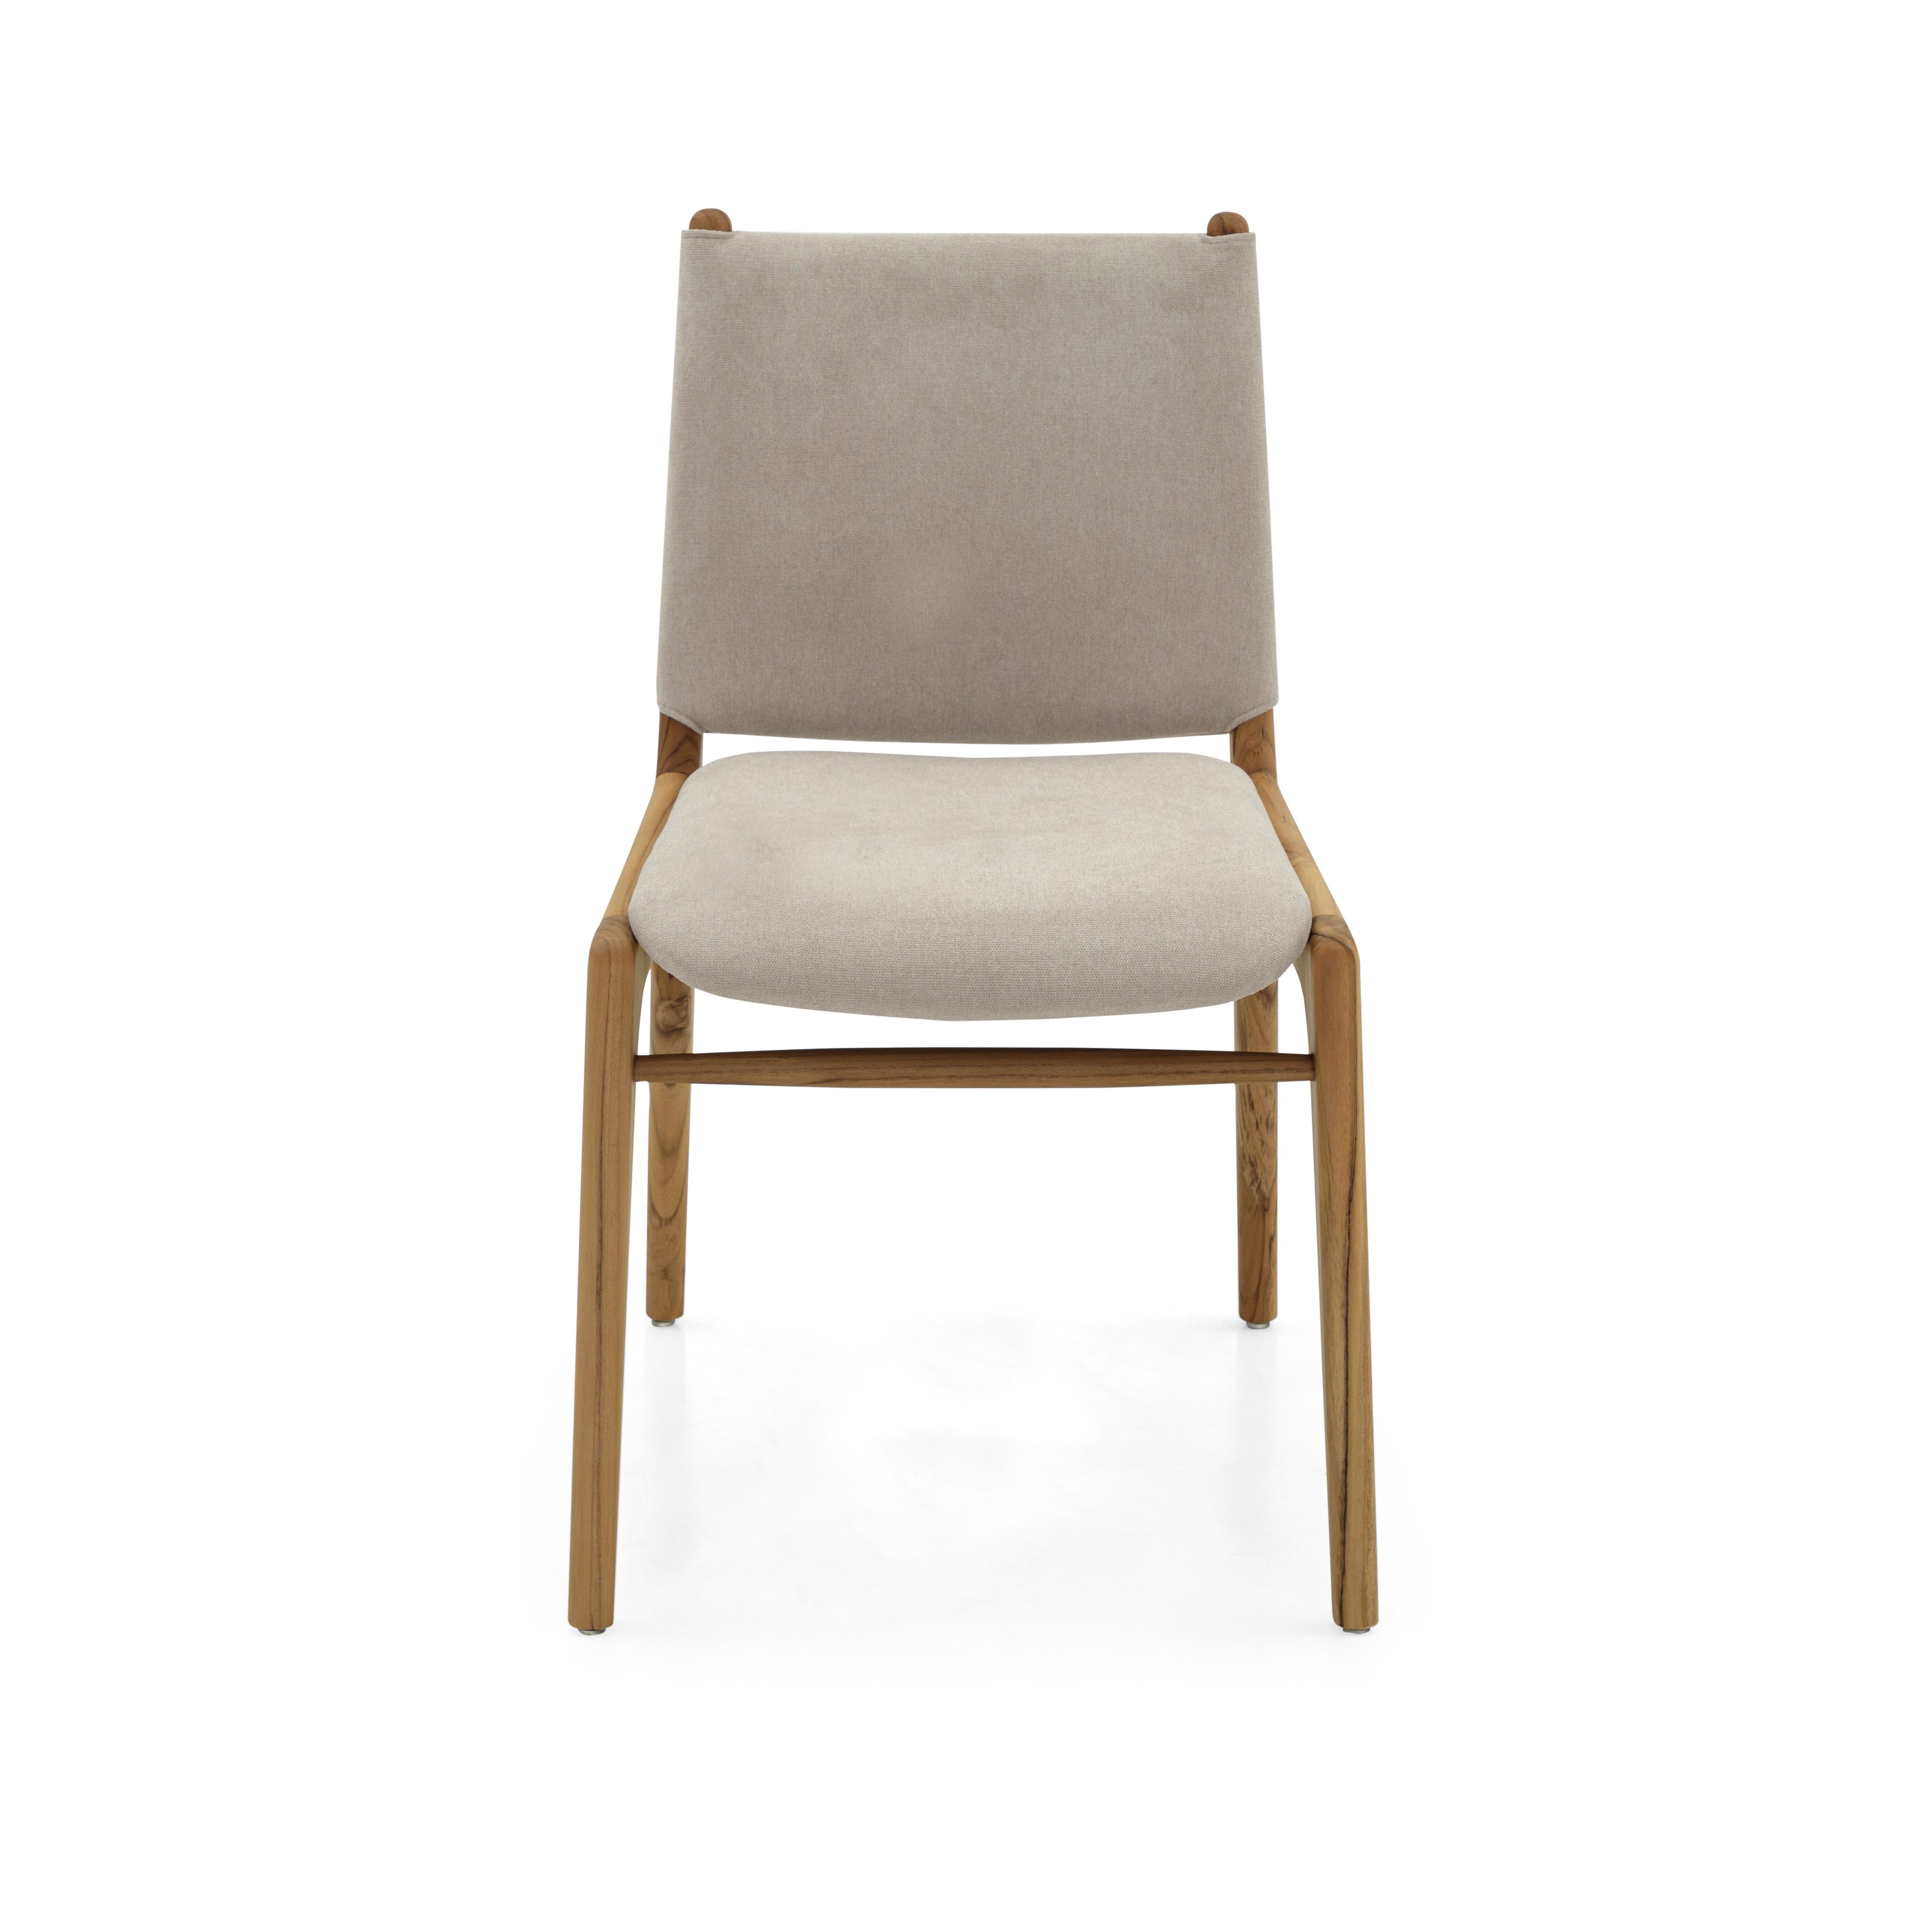 Cappio Dining Chair in Teak Wood Finish with Ivory Fabric, Set of 2 For Sale 1